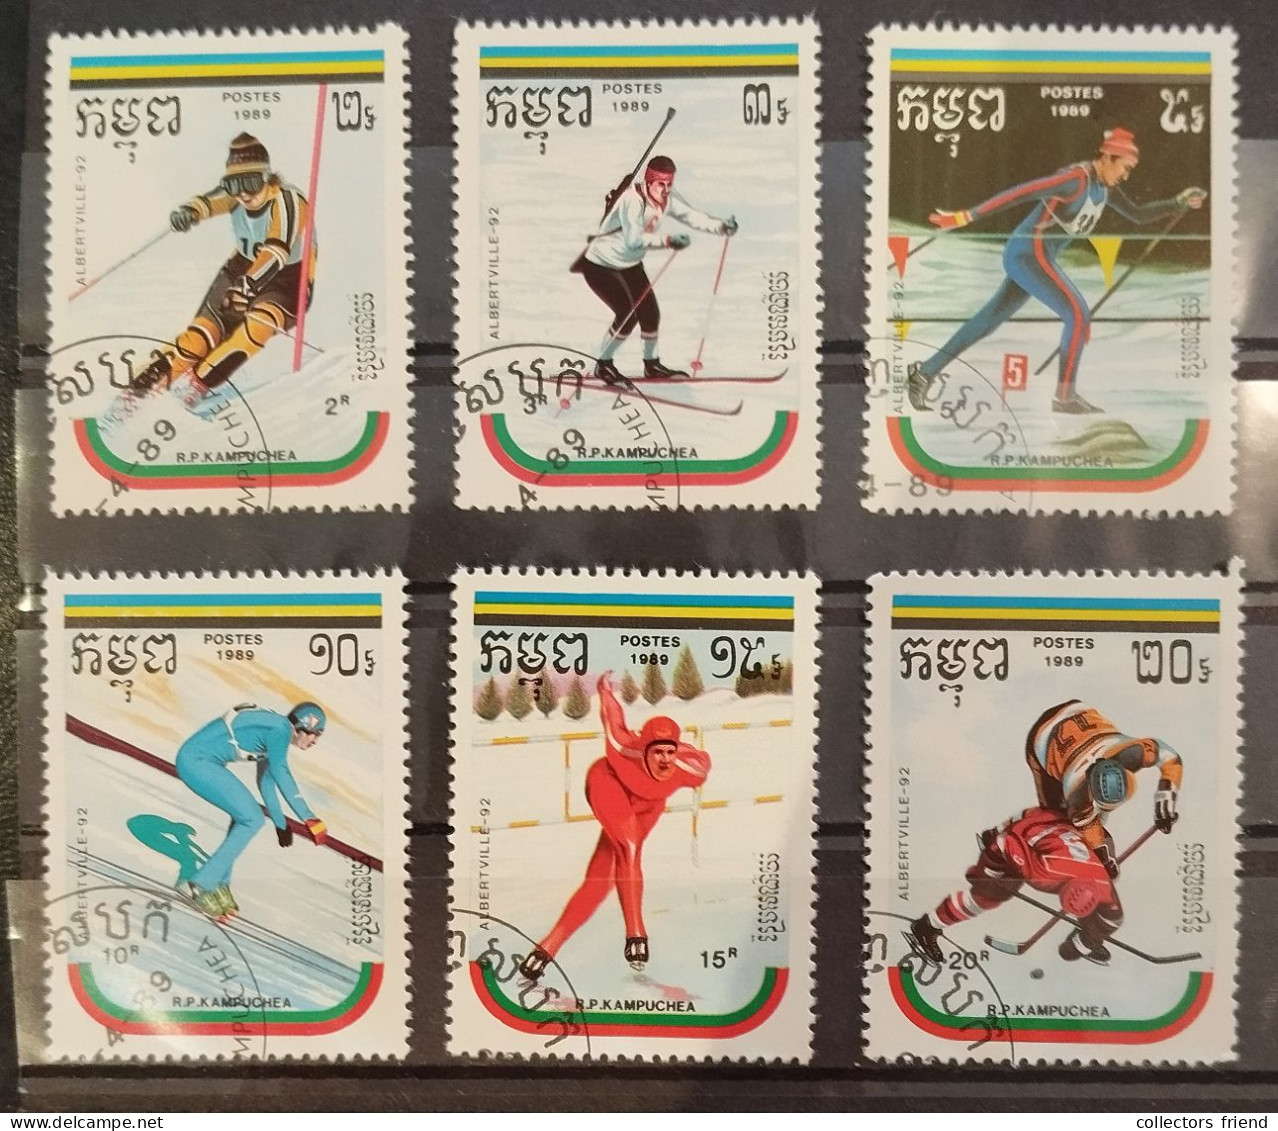 Kampuchea - Olympia Olimpiques Olympic Games -  Albertville '92 - 6 Stamps - Used - Winter 1992: Albertville